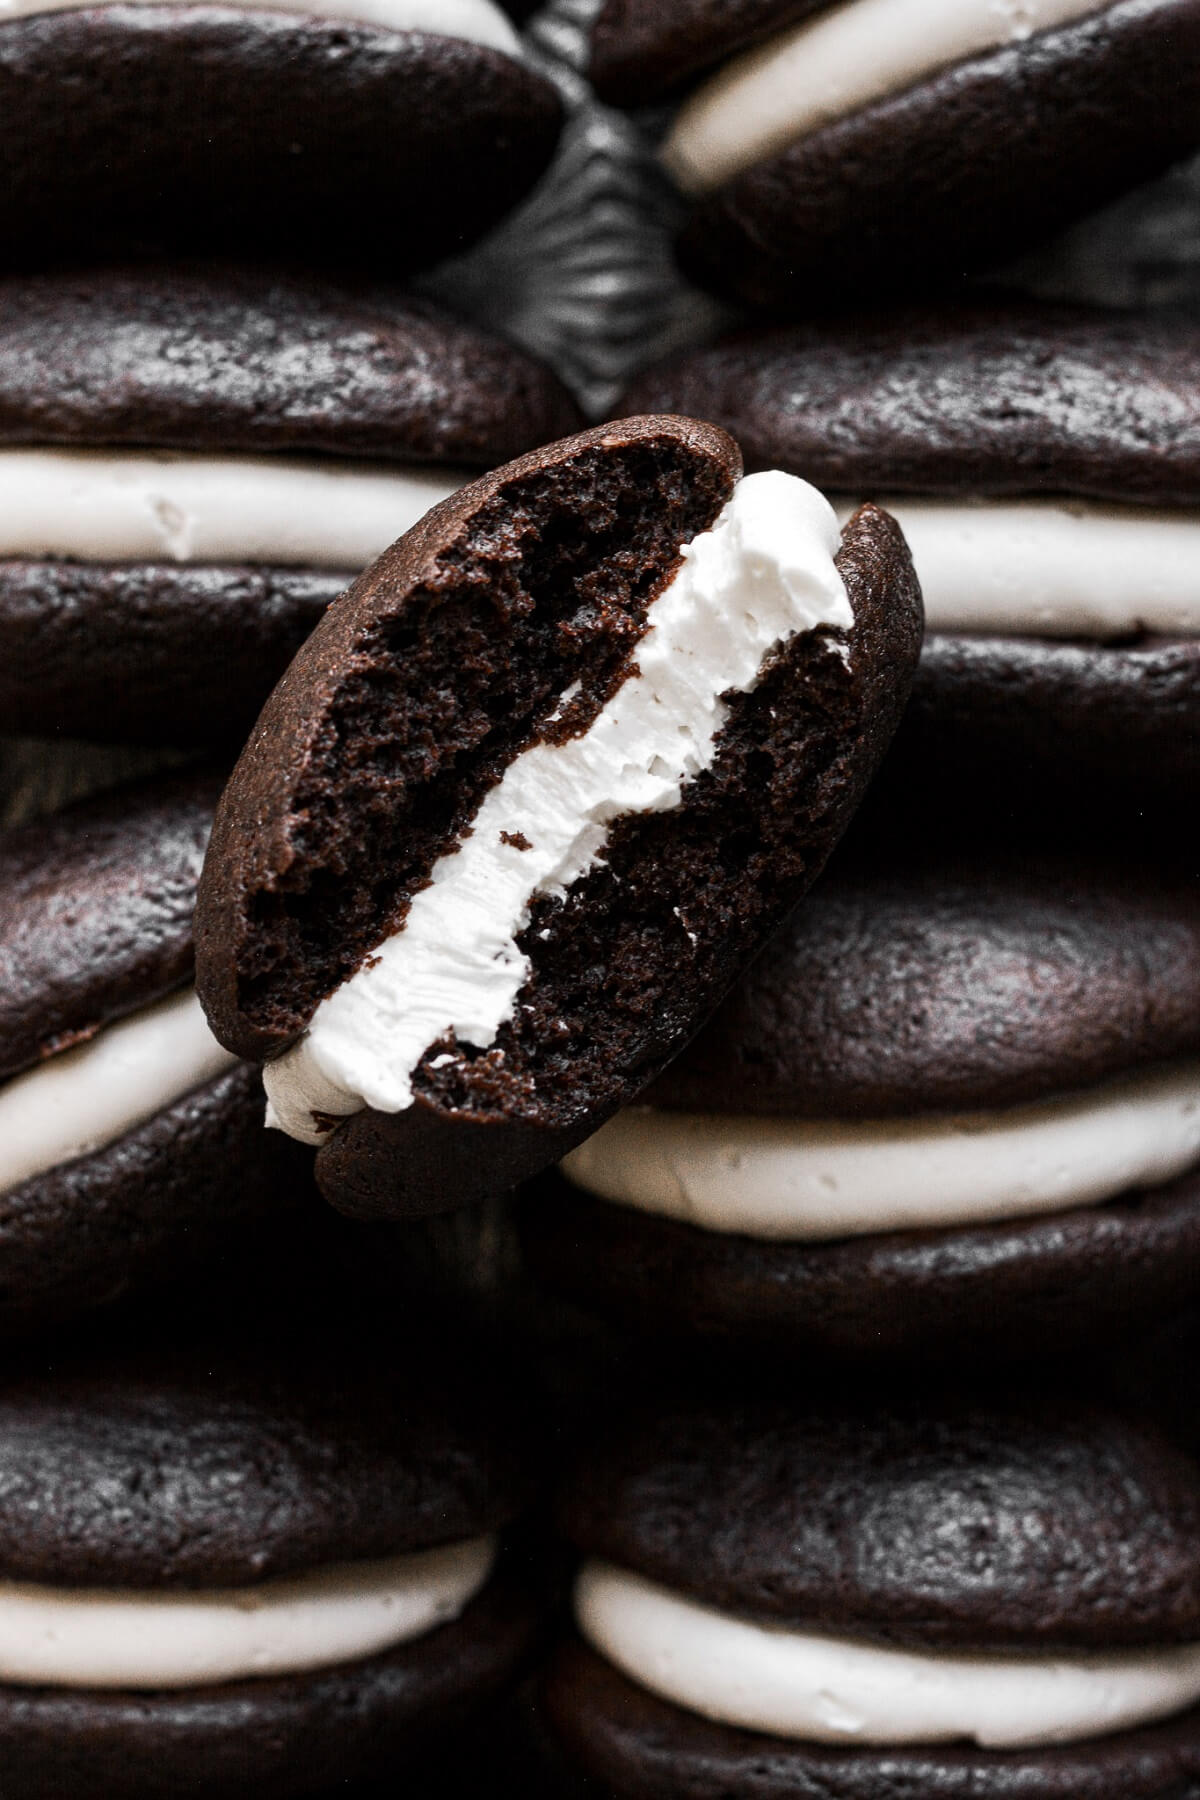 Chocolate whoopie pie with cream filling with a bite taken.